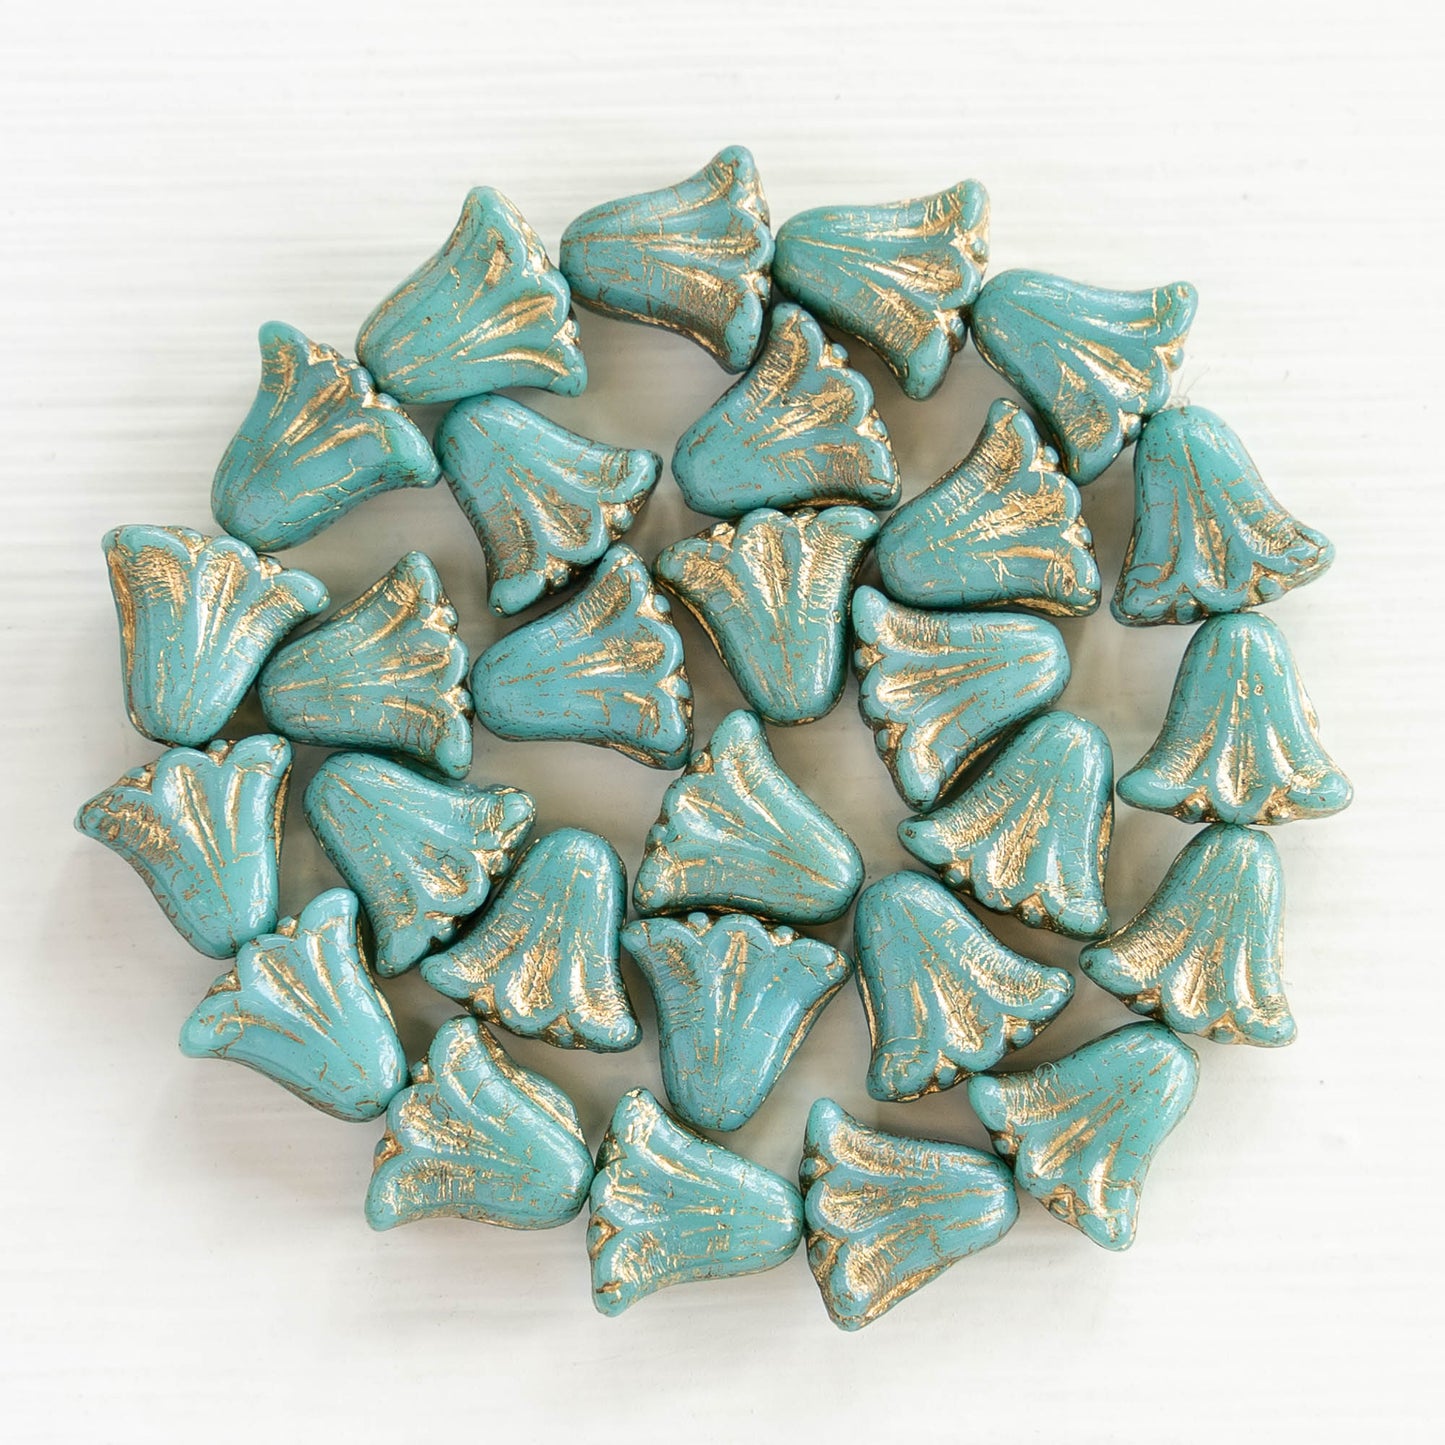 Load image into Gallery viewer, 9x10mm Lily Flower Beads - Turquoise with Gold Wash - 15 Beads
